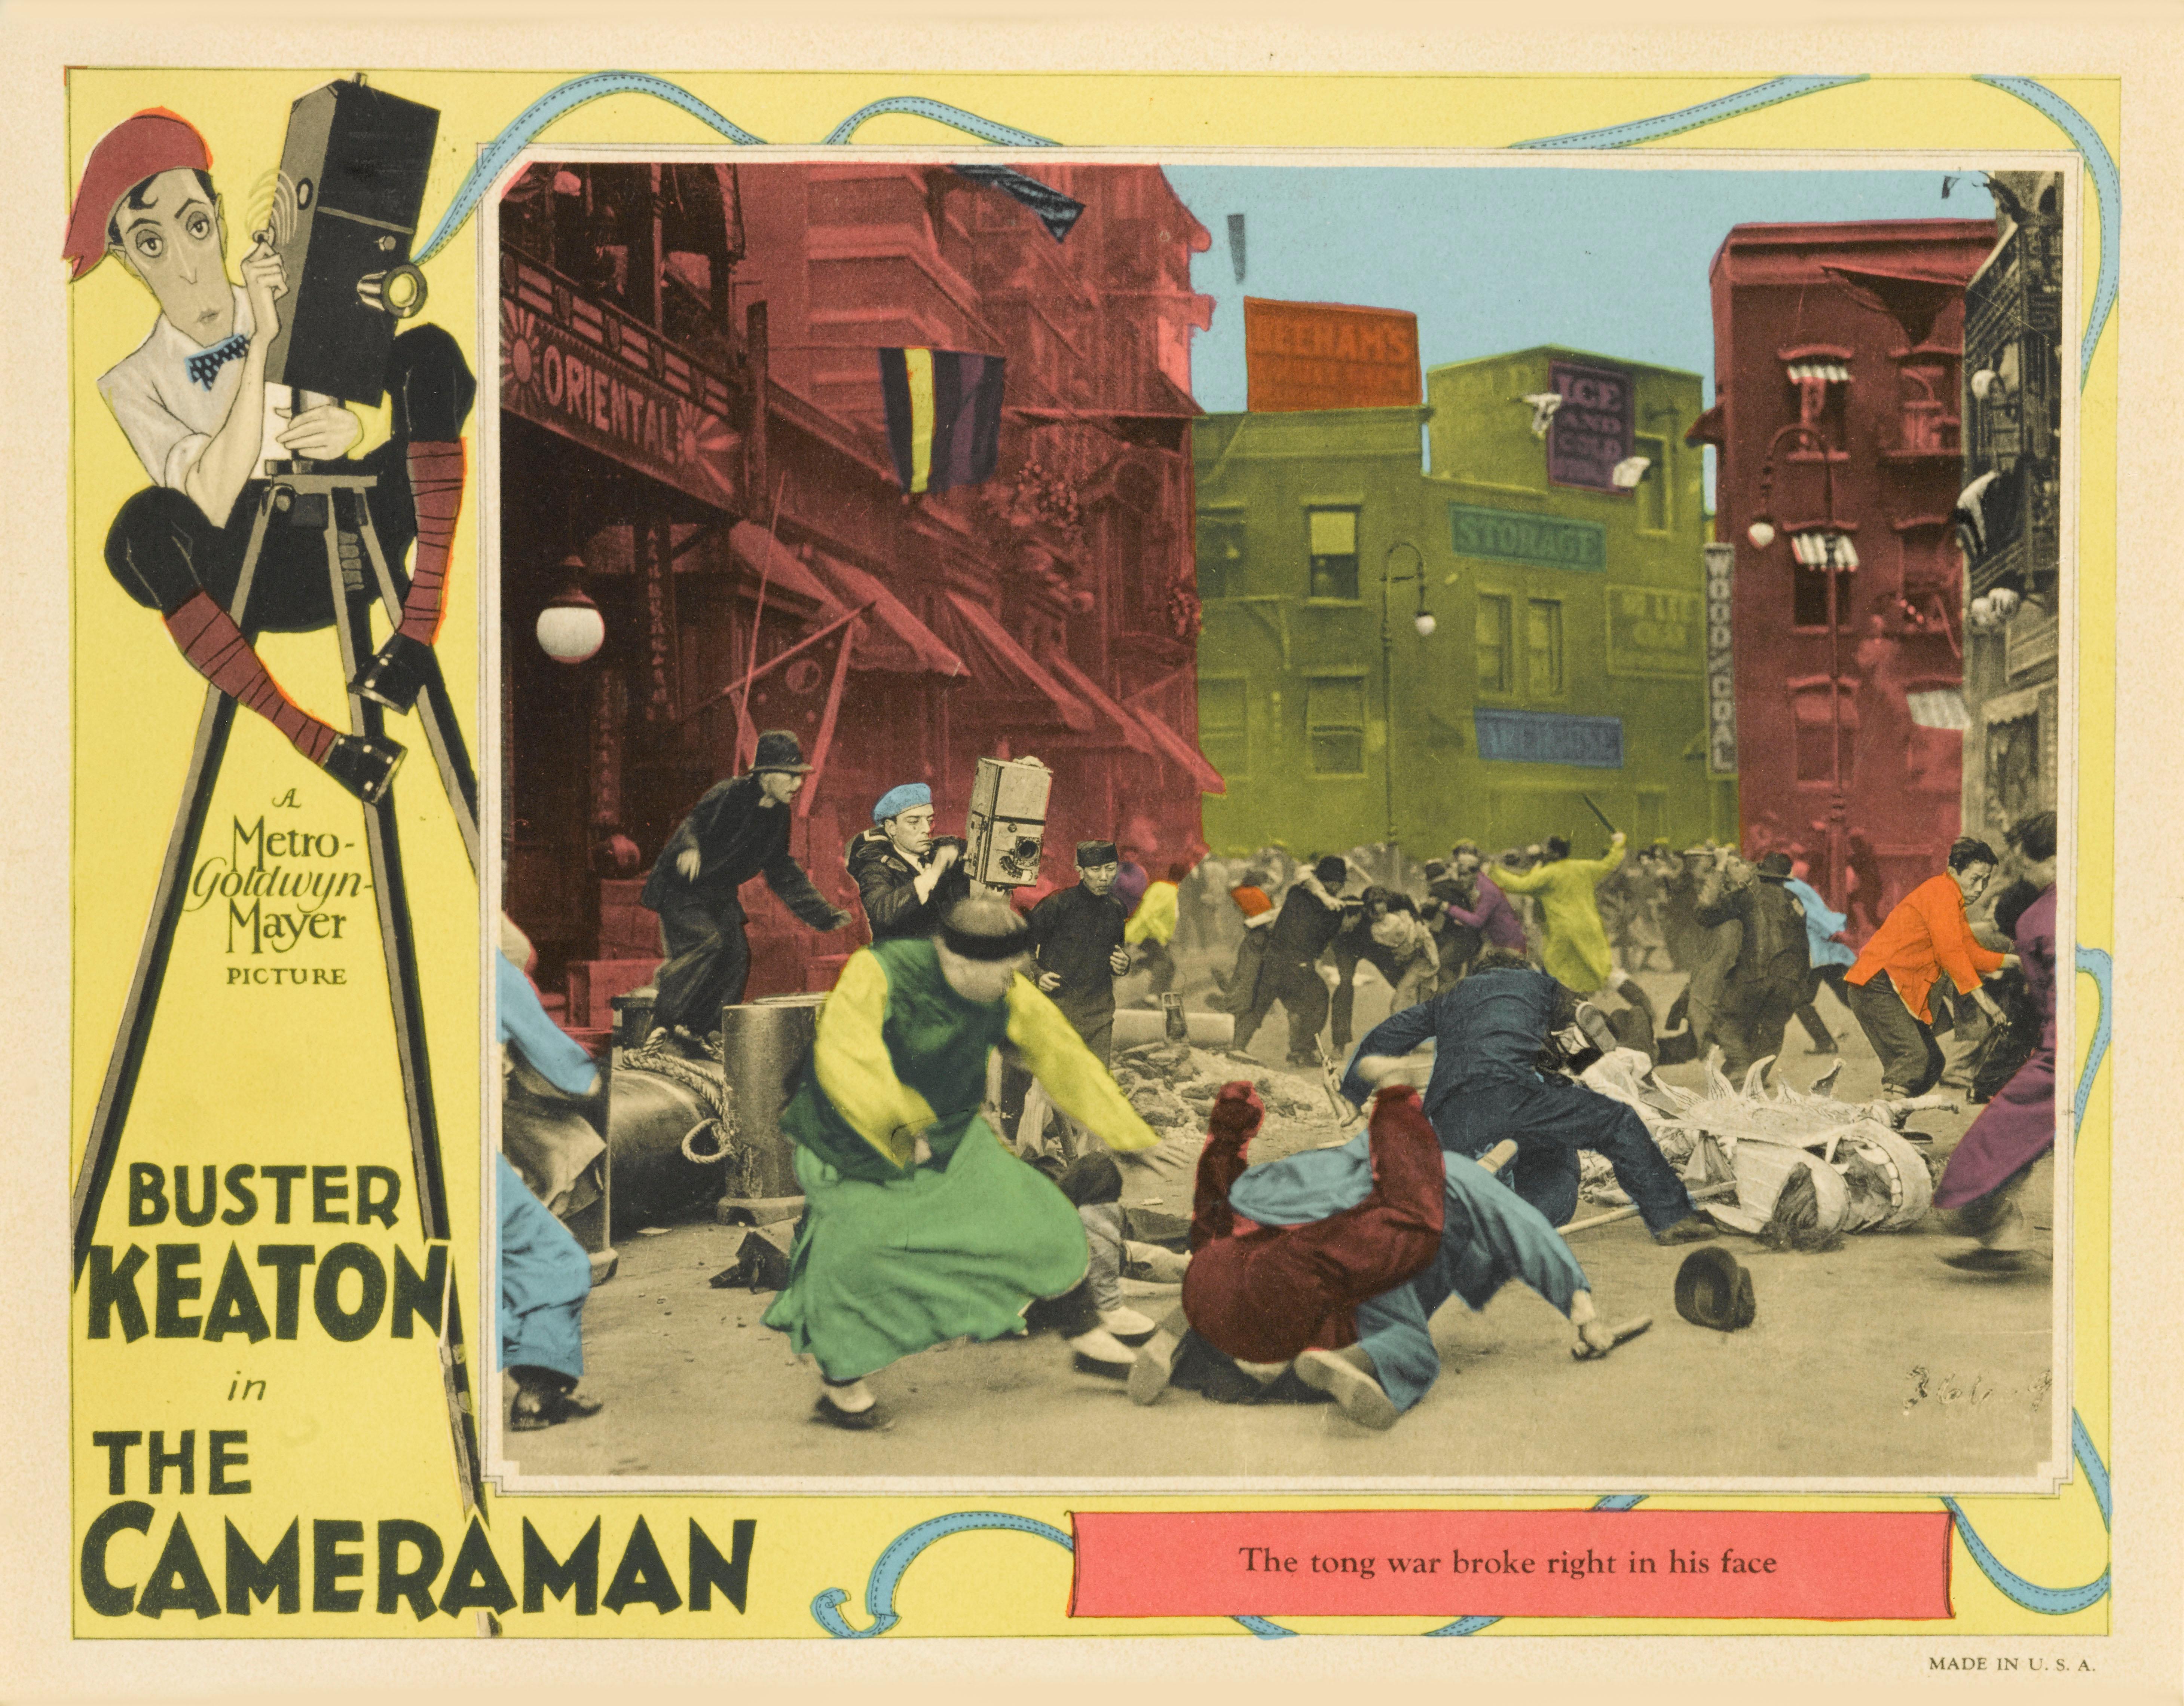 Framed original US lobby card for The Cameraman, 1928.
This silent comedy was directed by Edward Sedgwick and an uncredited Buster Keaton. The film stars Keaton, Marceline Day and Harold Goodwin. It was Keaton's first film with Metro-Goldwyn-Mayer,